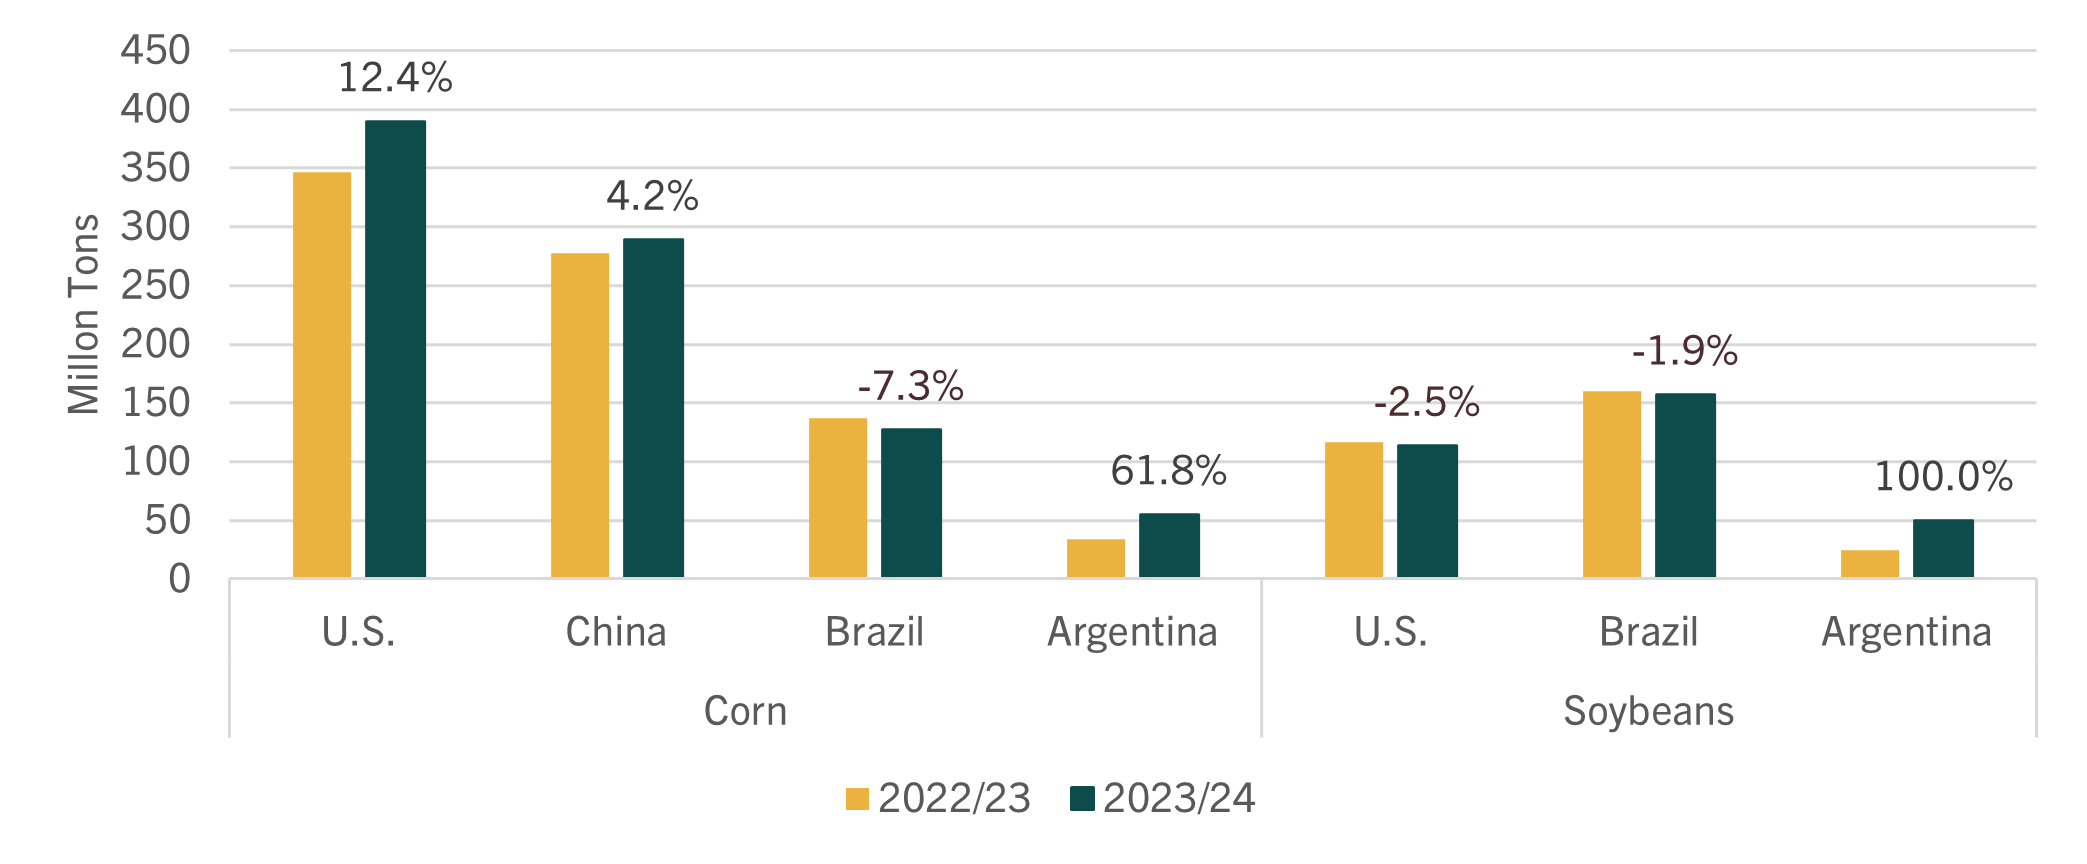 Corn and soybean production by country, 2022-23 and 2023-24 crop